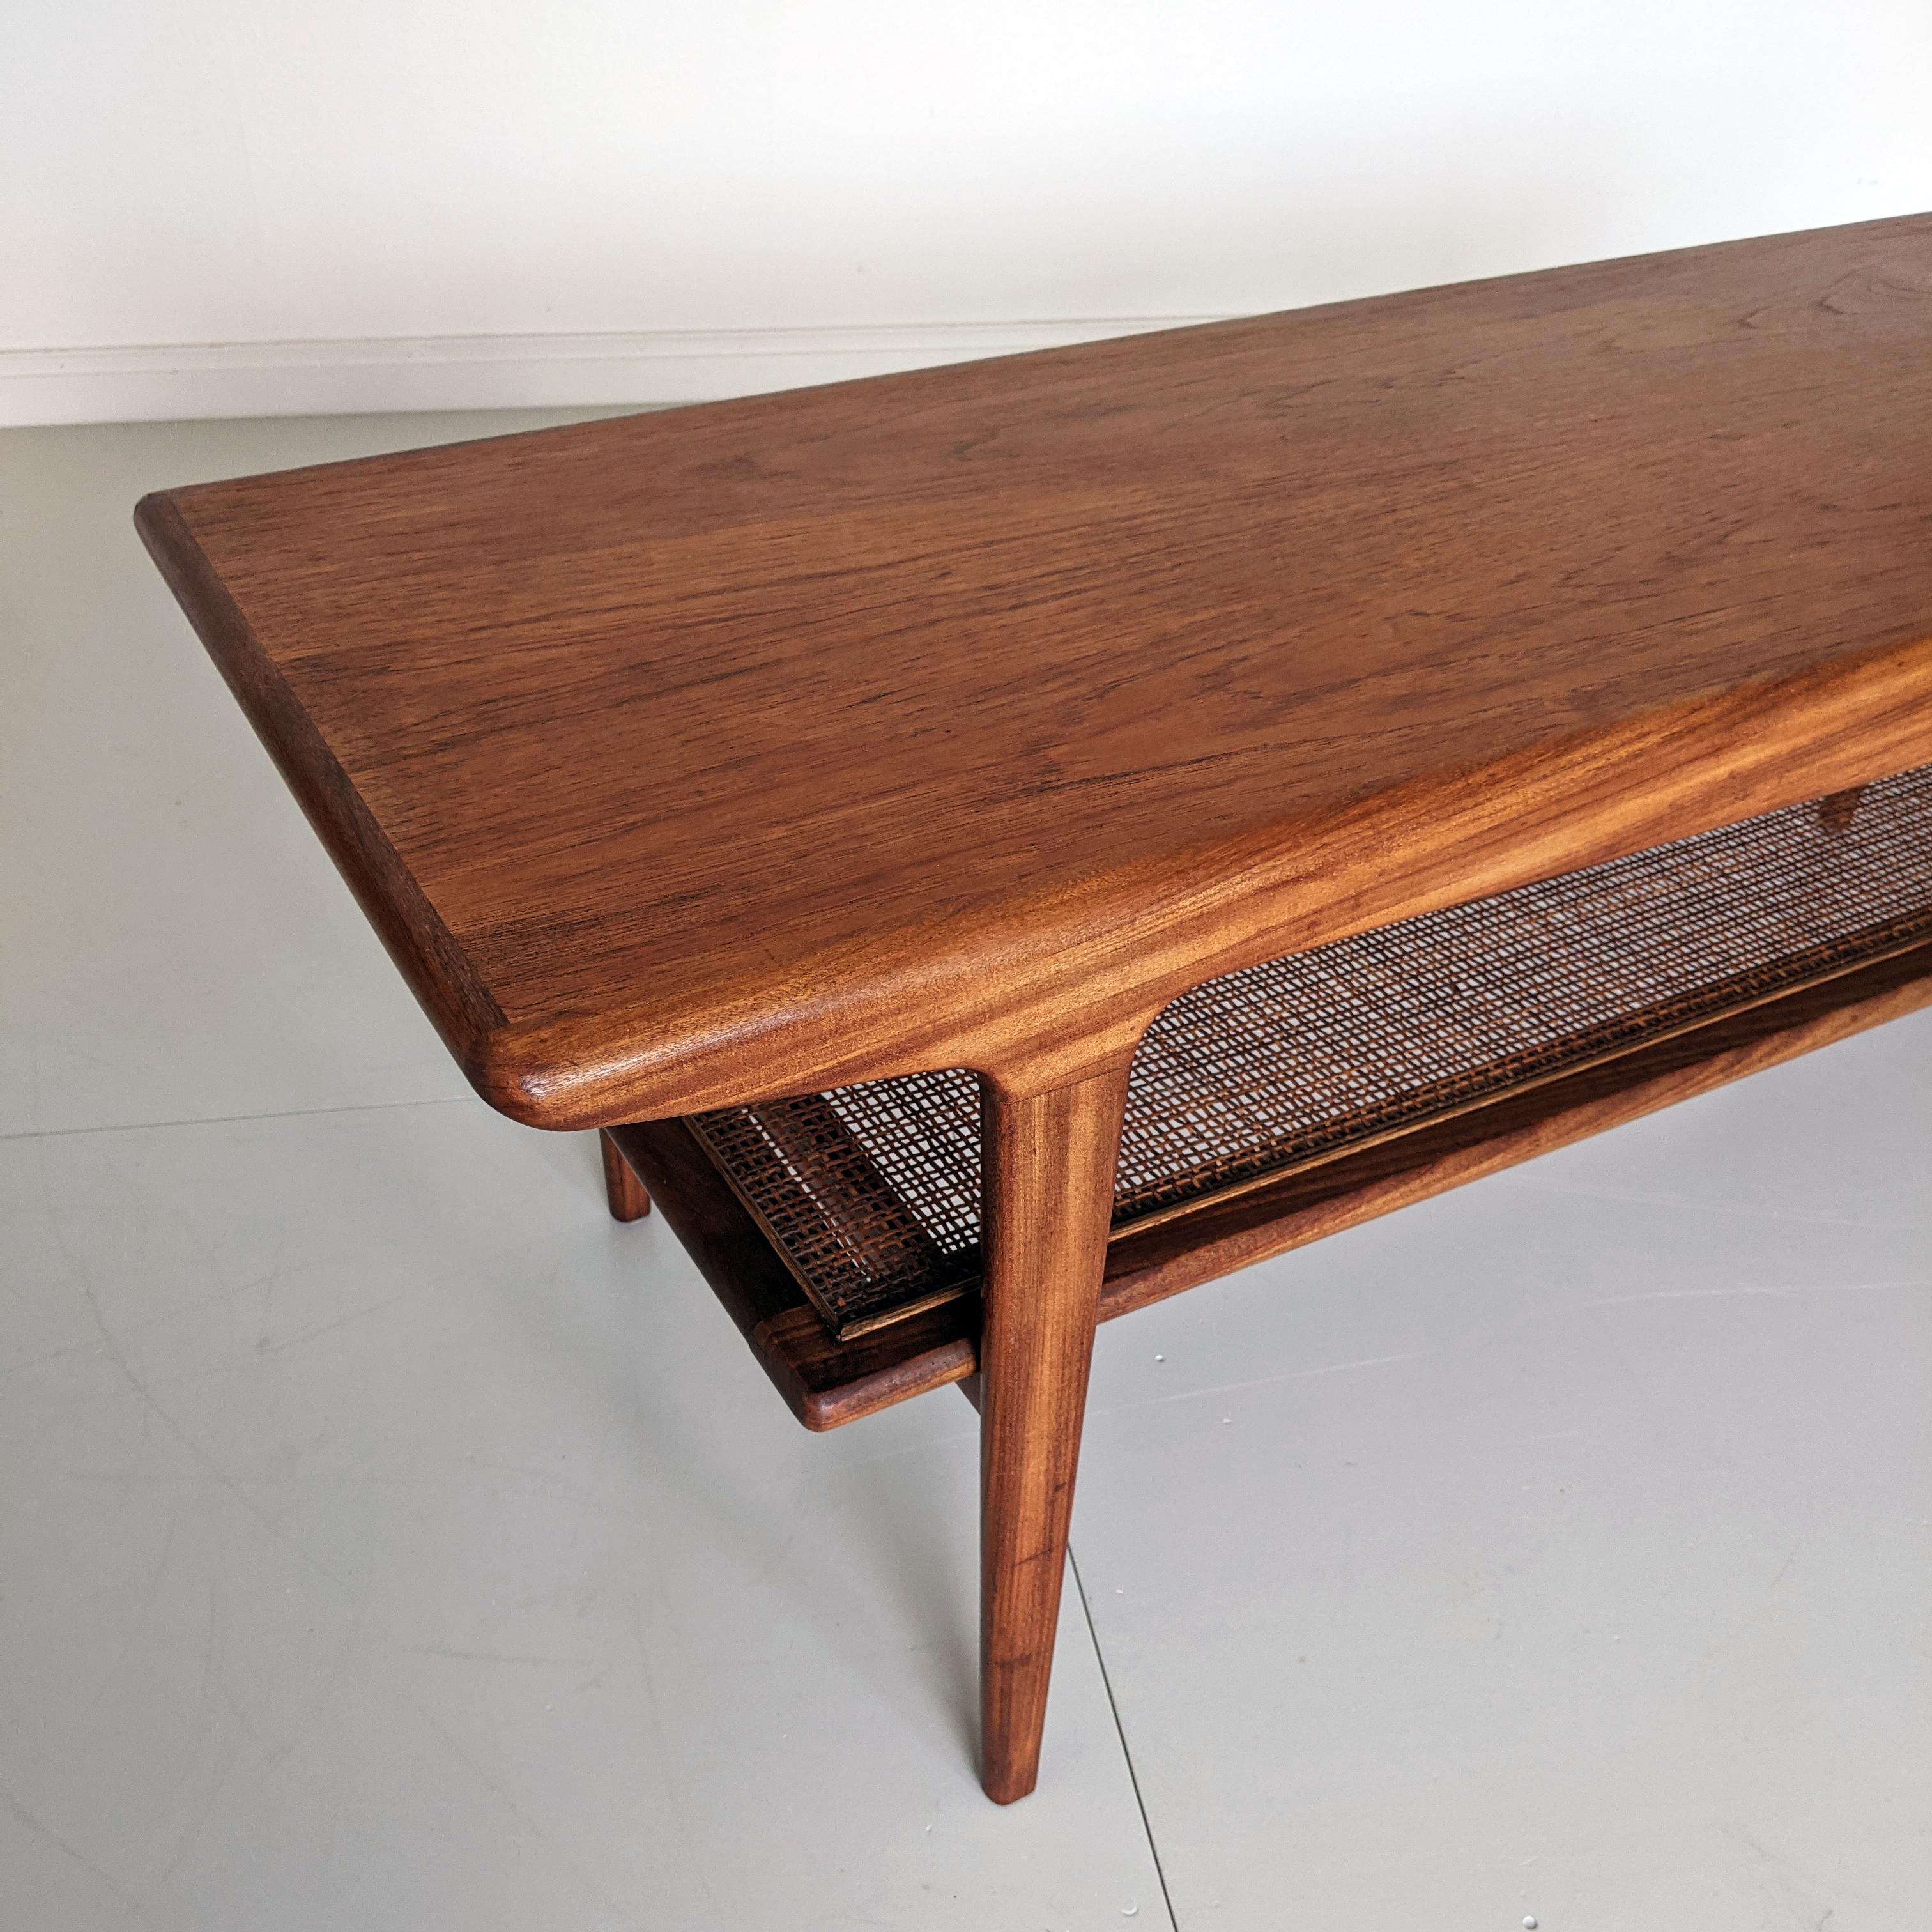 Carved John Herbert for Younger, Mid Century Danish Style Teak and Cane Coffee Table